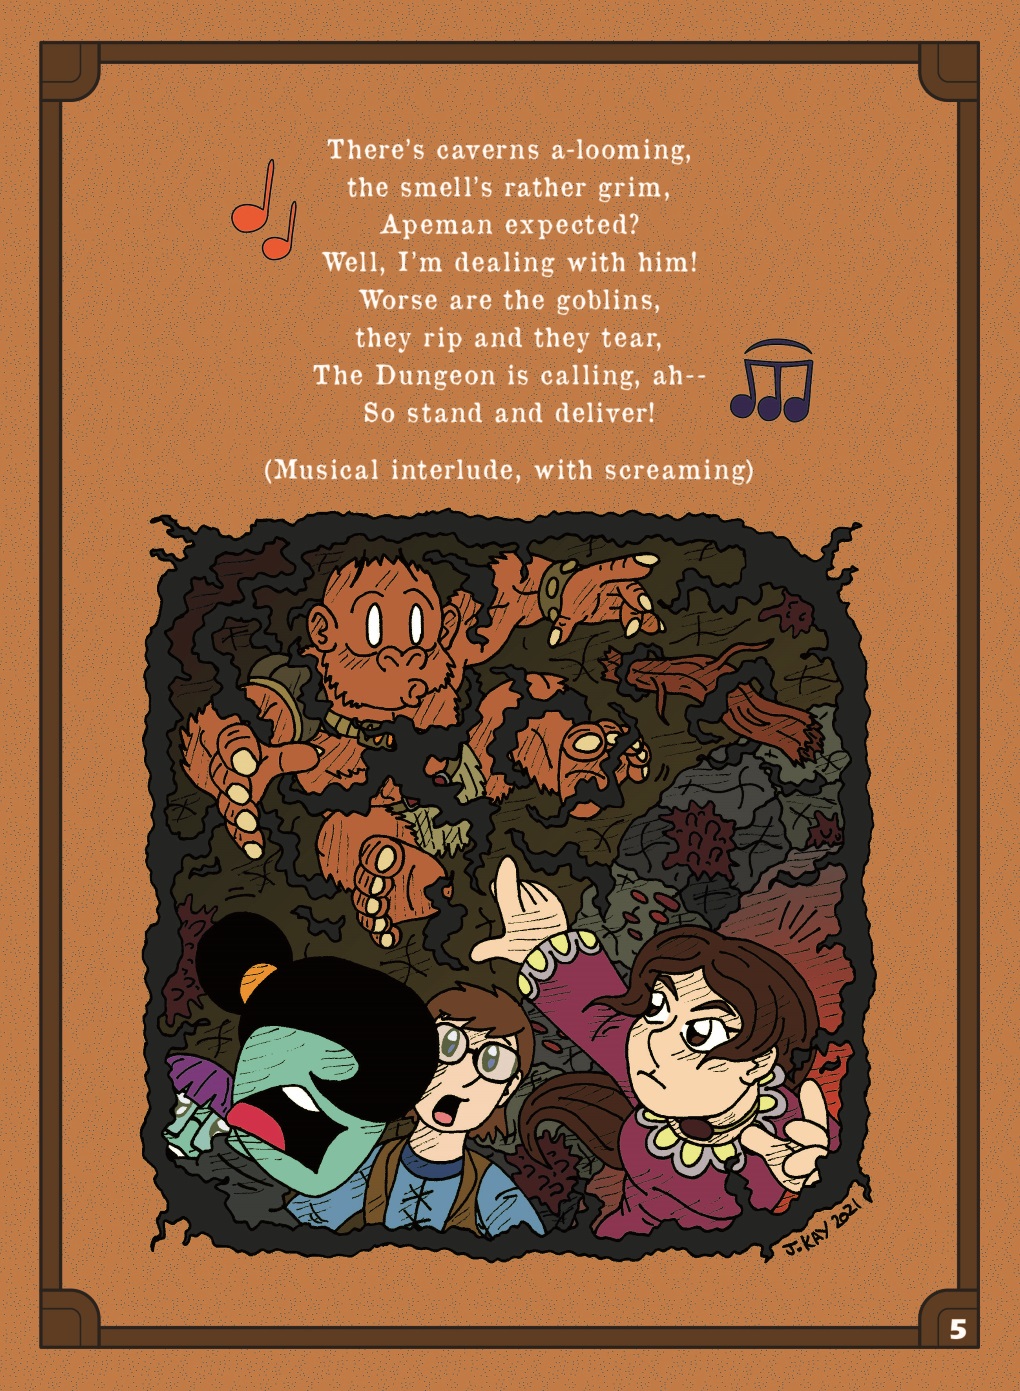 The Strangest Coven by Cartoonist_at_Large page 5 out of 8